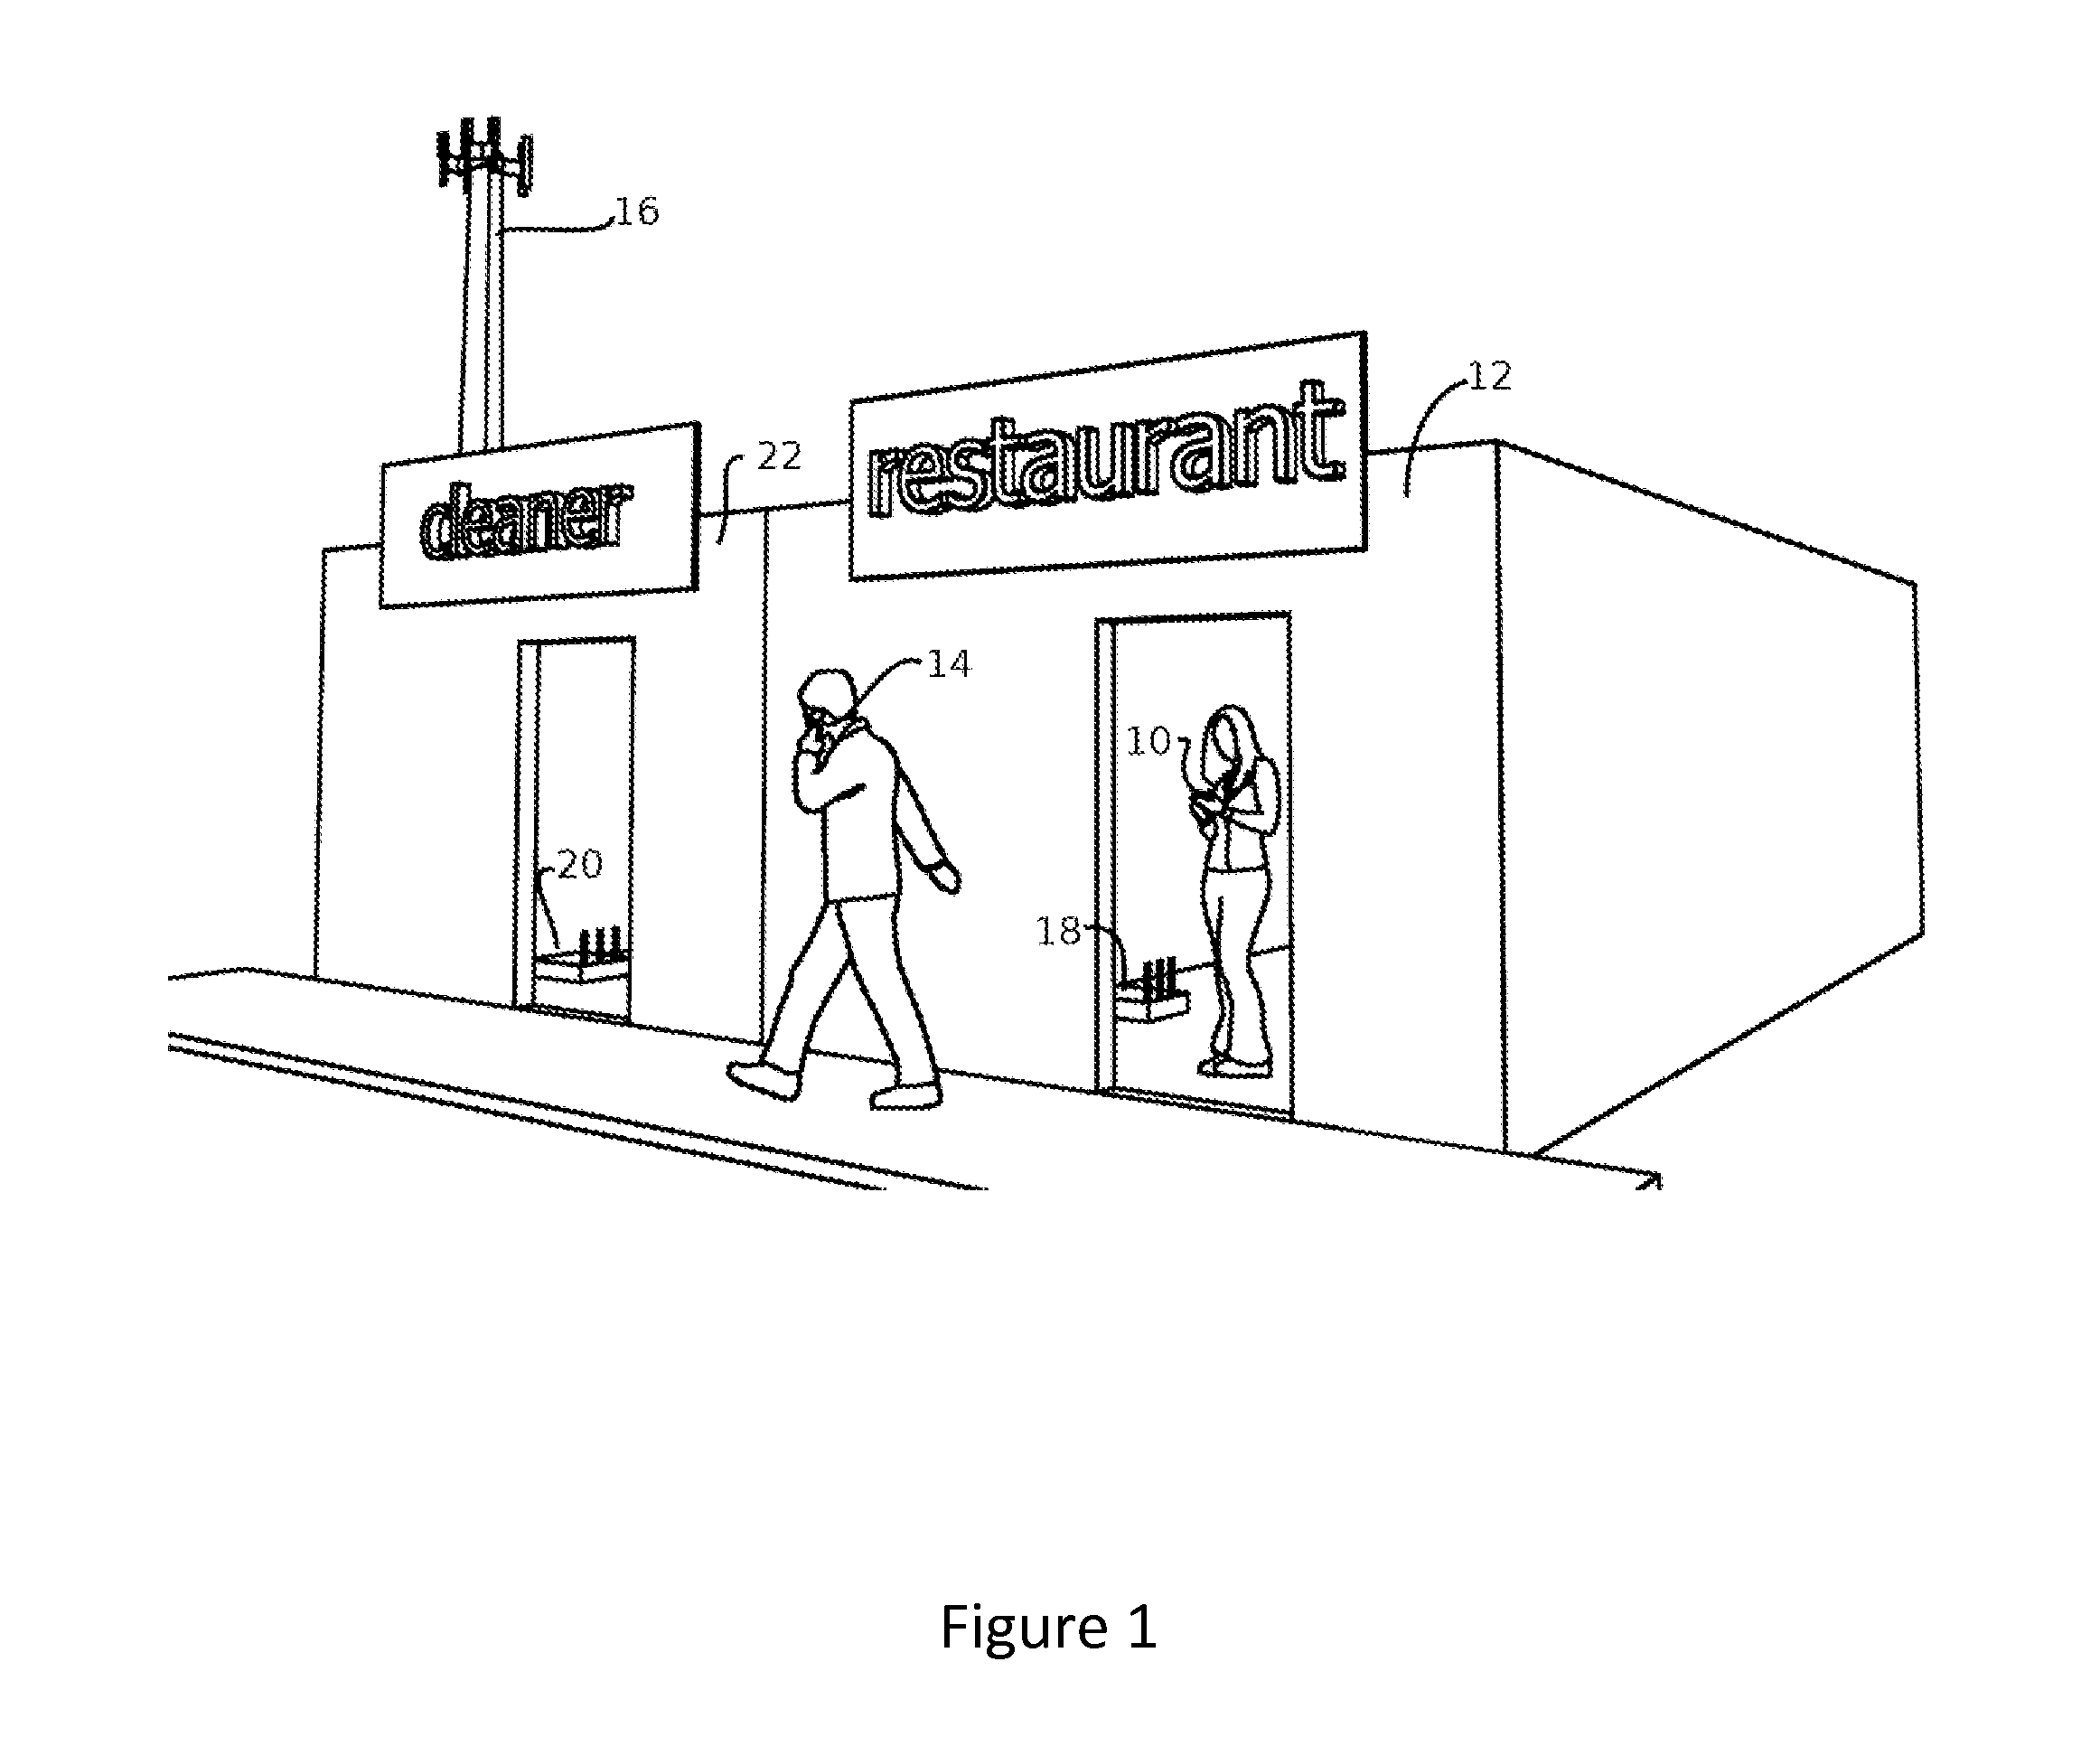 Apparatus and method for ascertaining the operating hours of a business